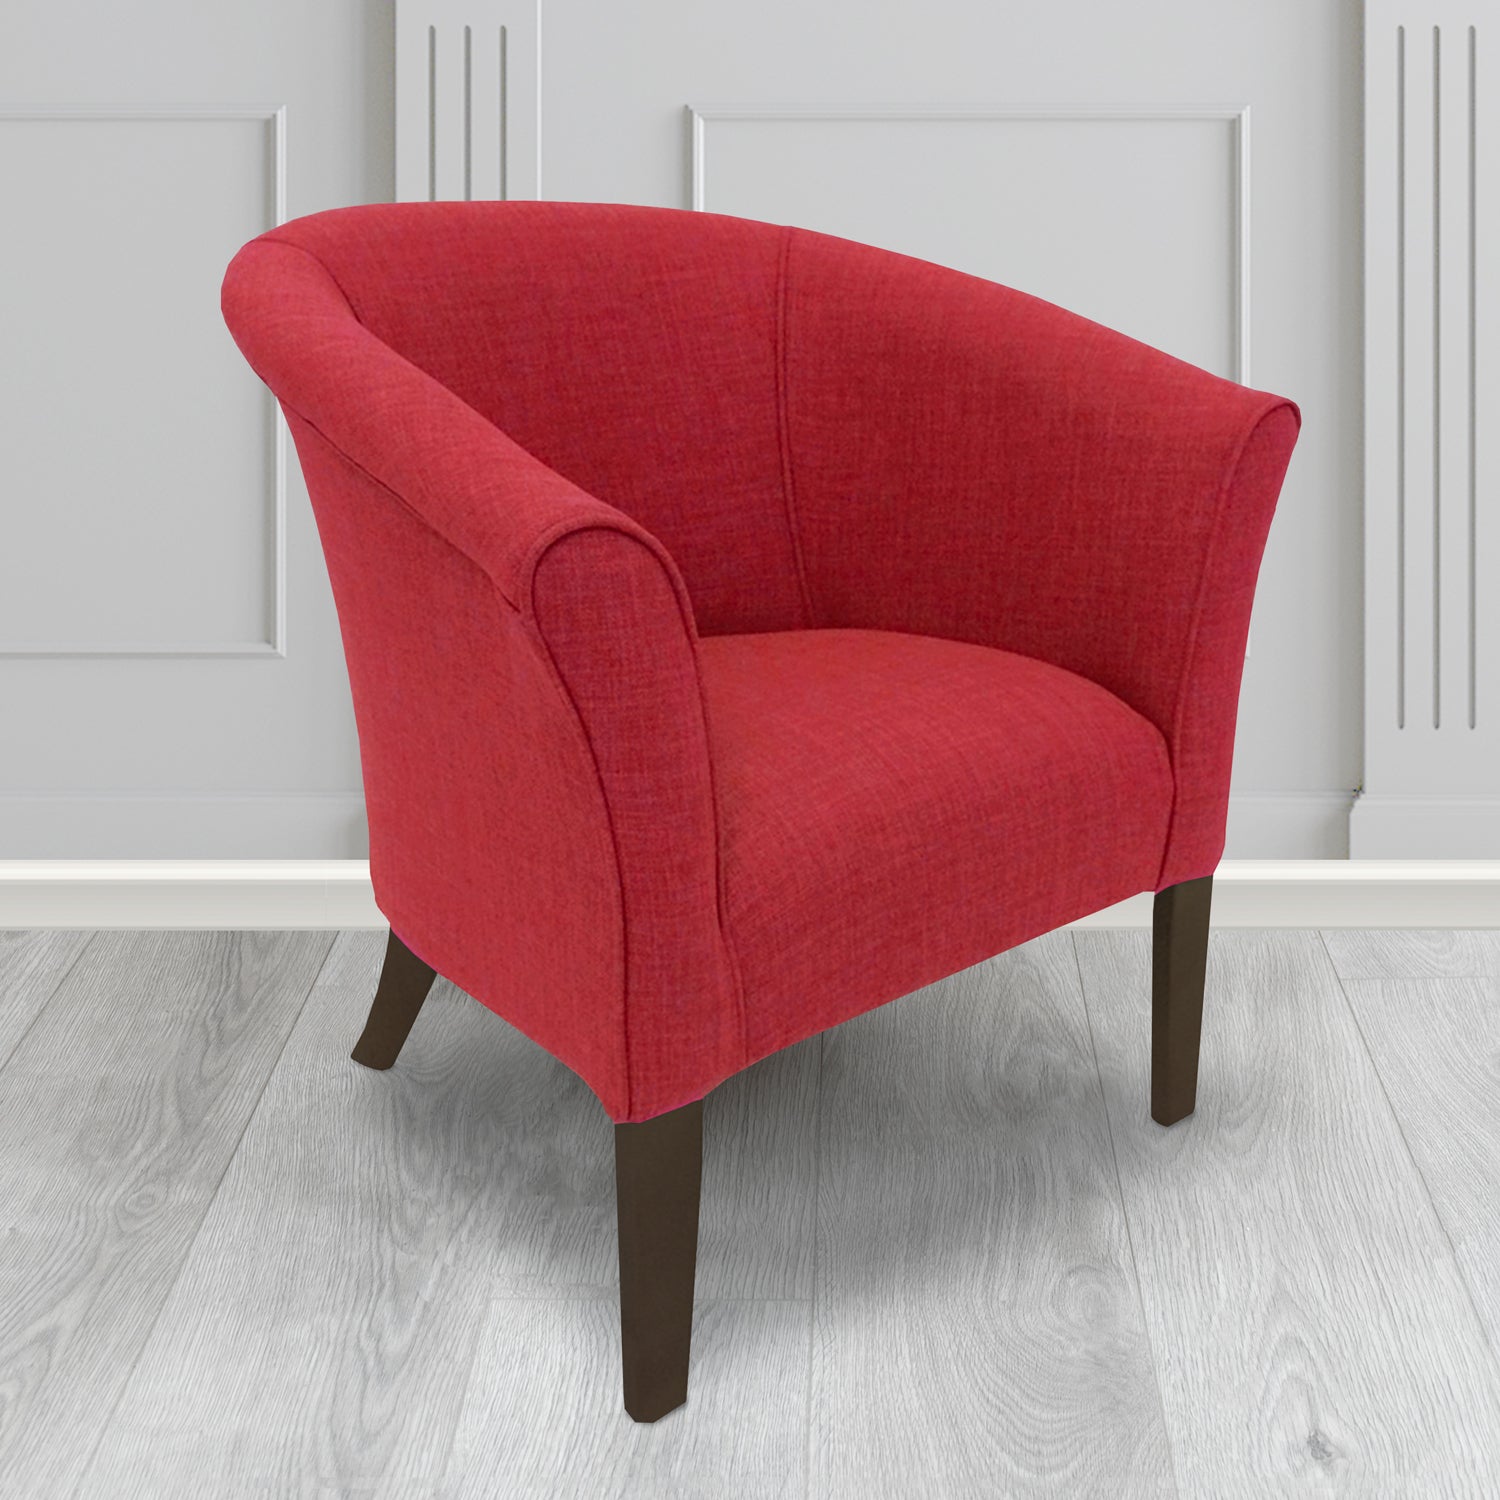 Quill Tub Chair in Linetta Red Crib 5 Plain Fabric - Antimicrobial, Stain Resistant & Waterproof - The Tub Chair Shop